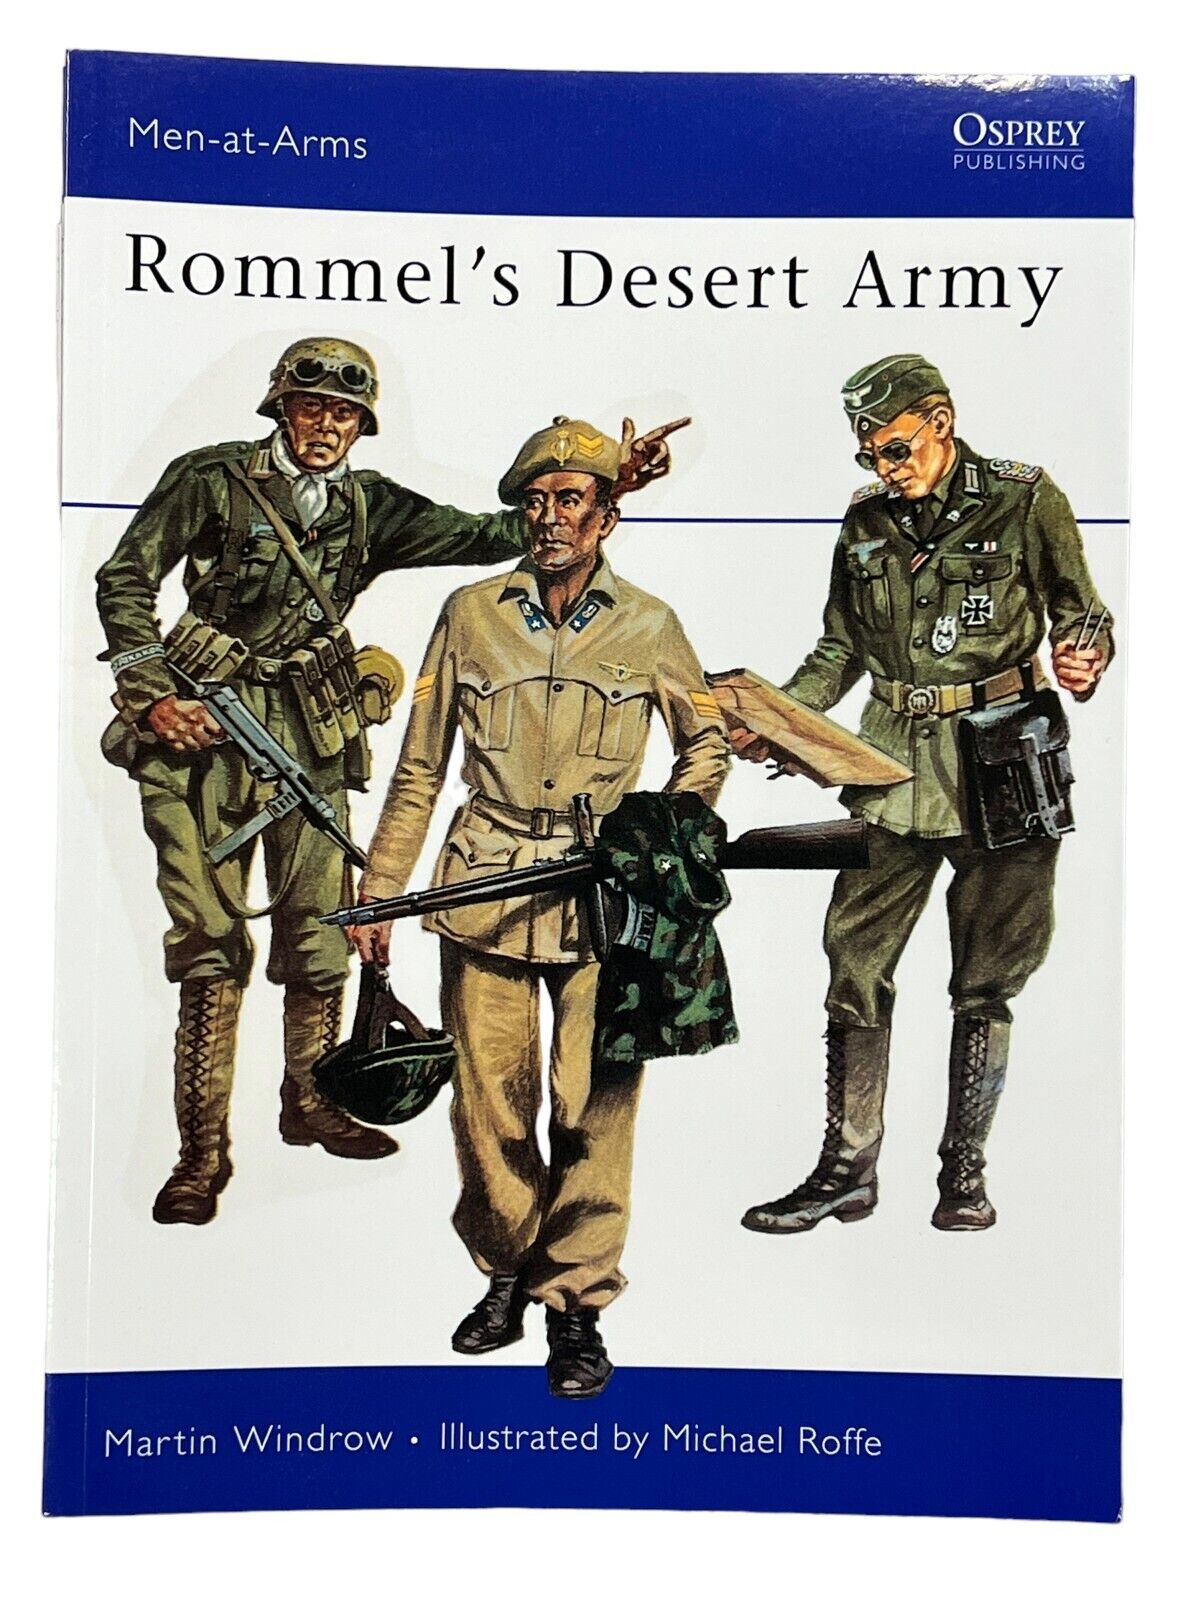 WW2 German Rommels Desert Army Osprey Soft Cover Reference Book